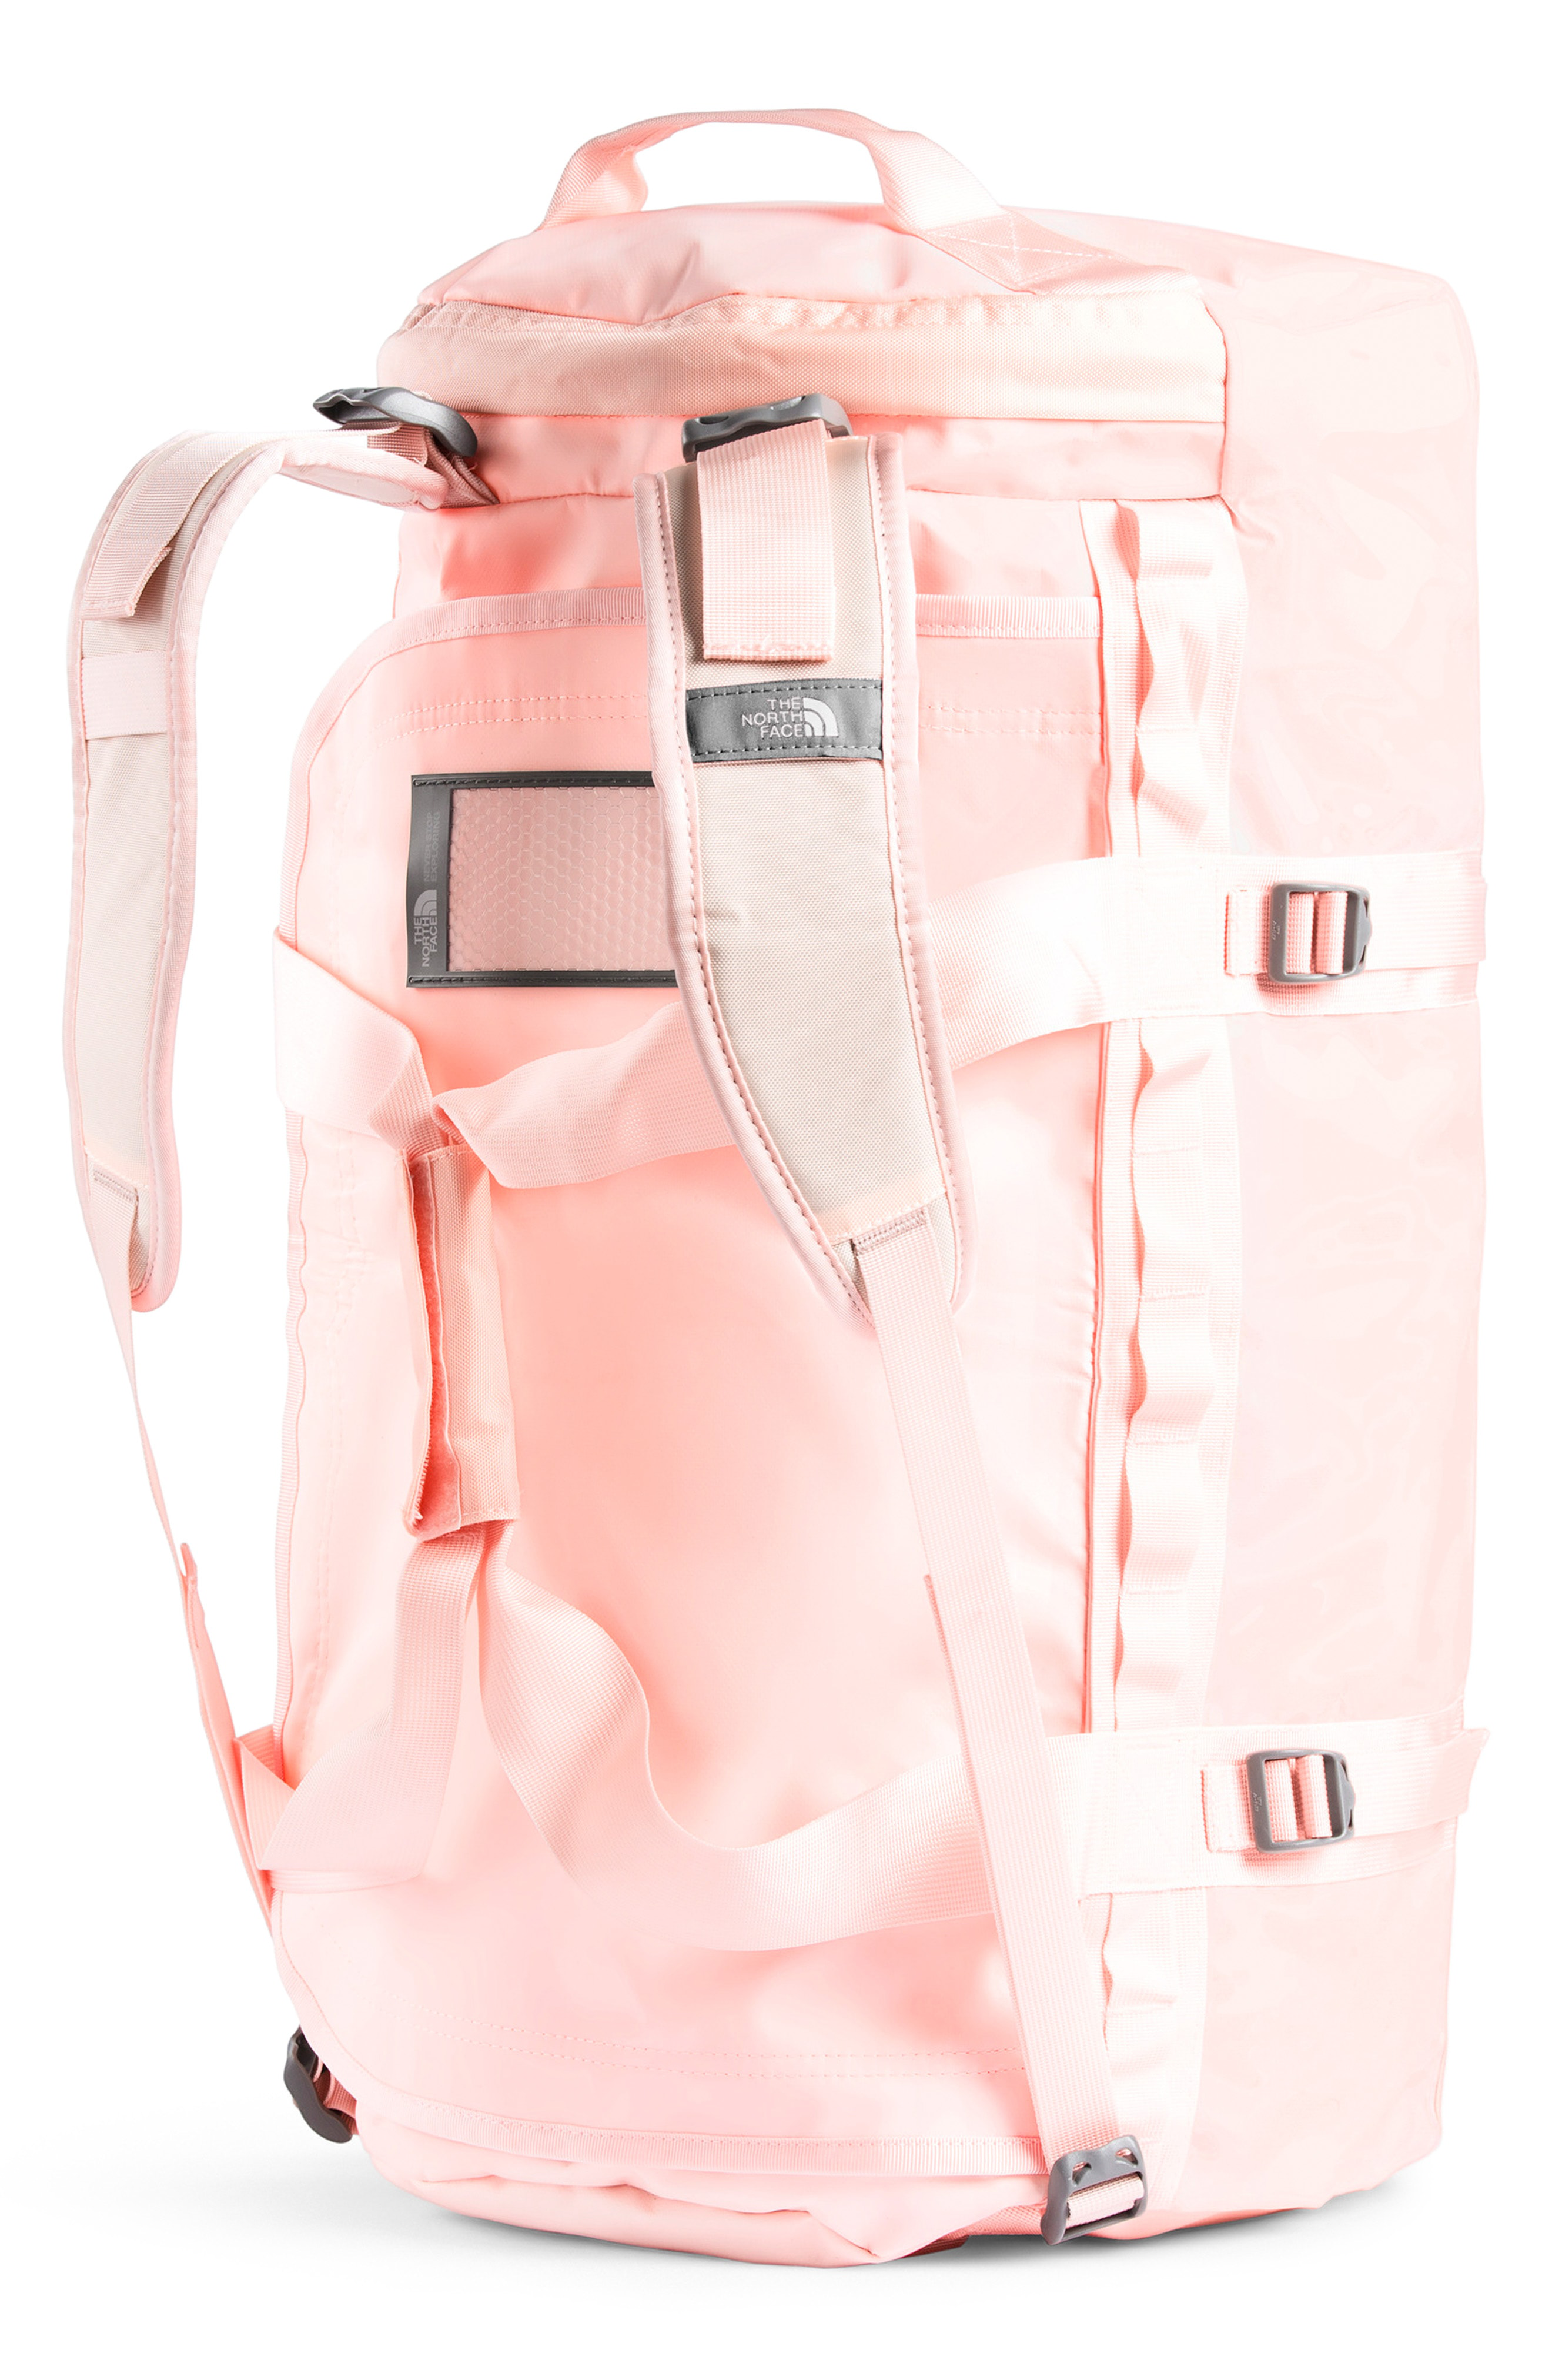 the north face pink bag